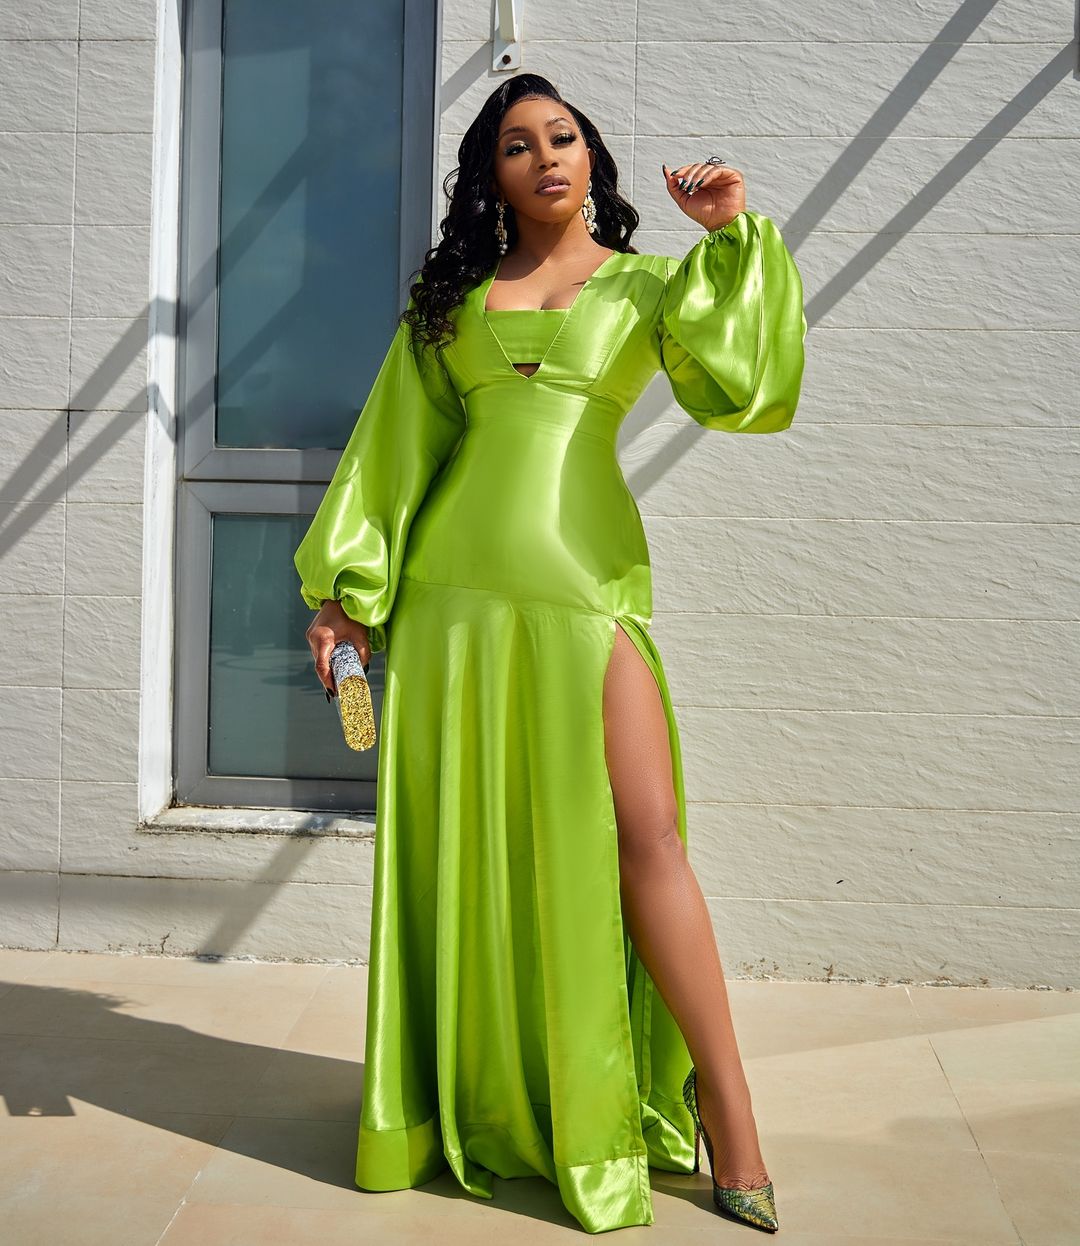 A Moment Please For Rita Dominic's Gorgeous Green Look | BN Style